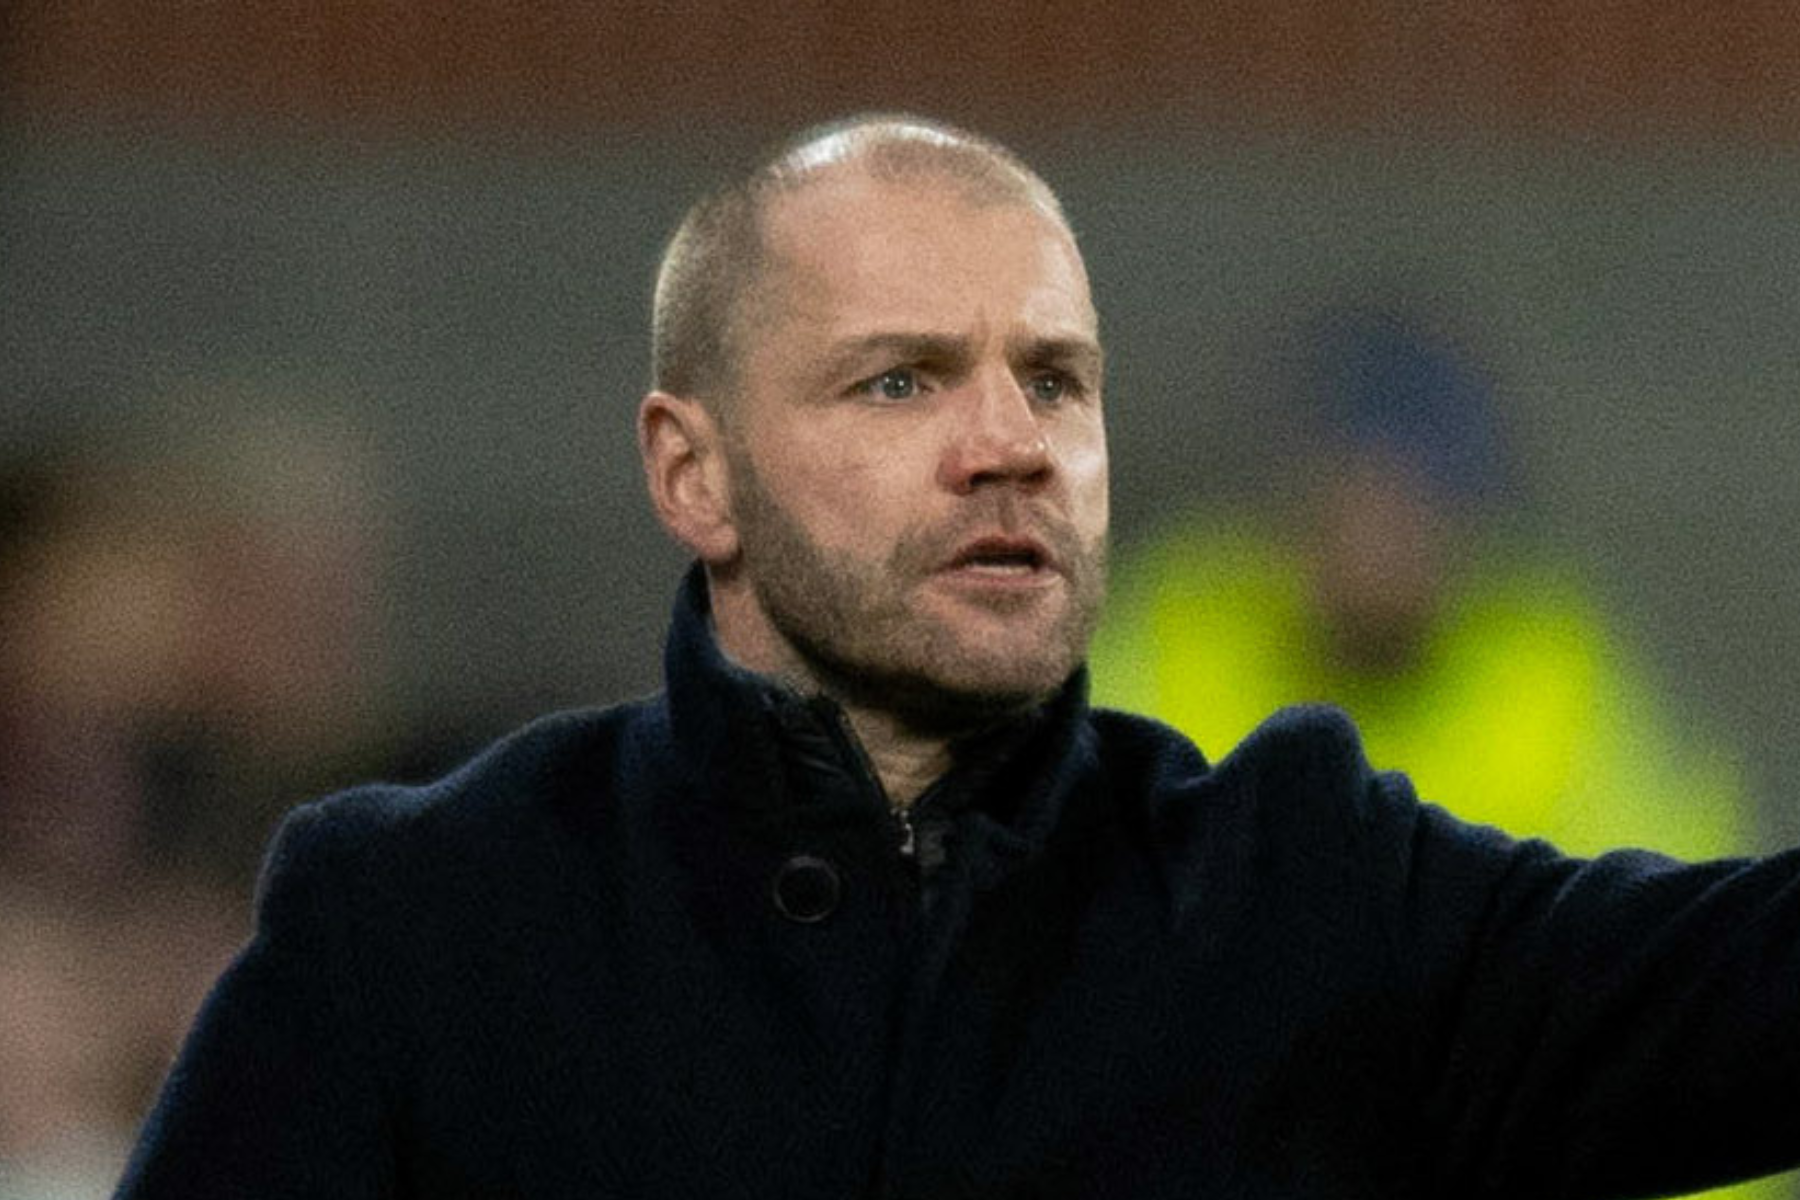 Hearts boss Robbie Neilson hit with two-game ban ahead of Hibs clash